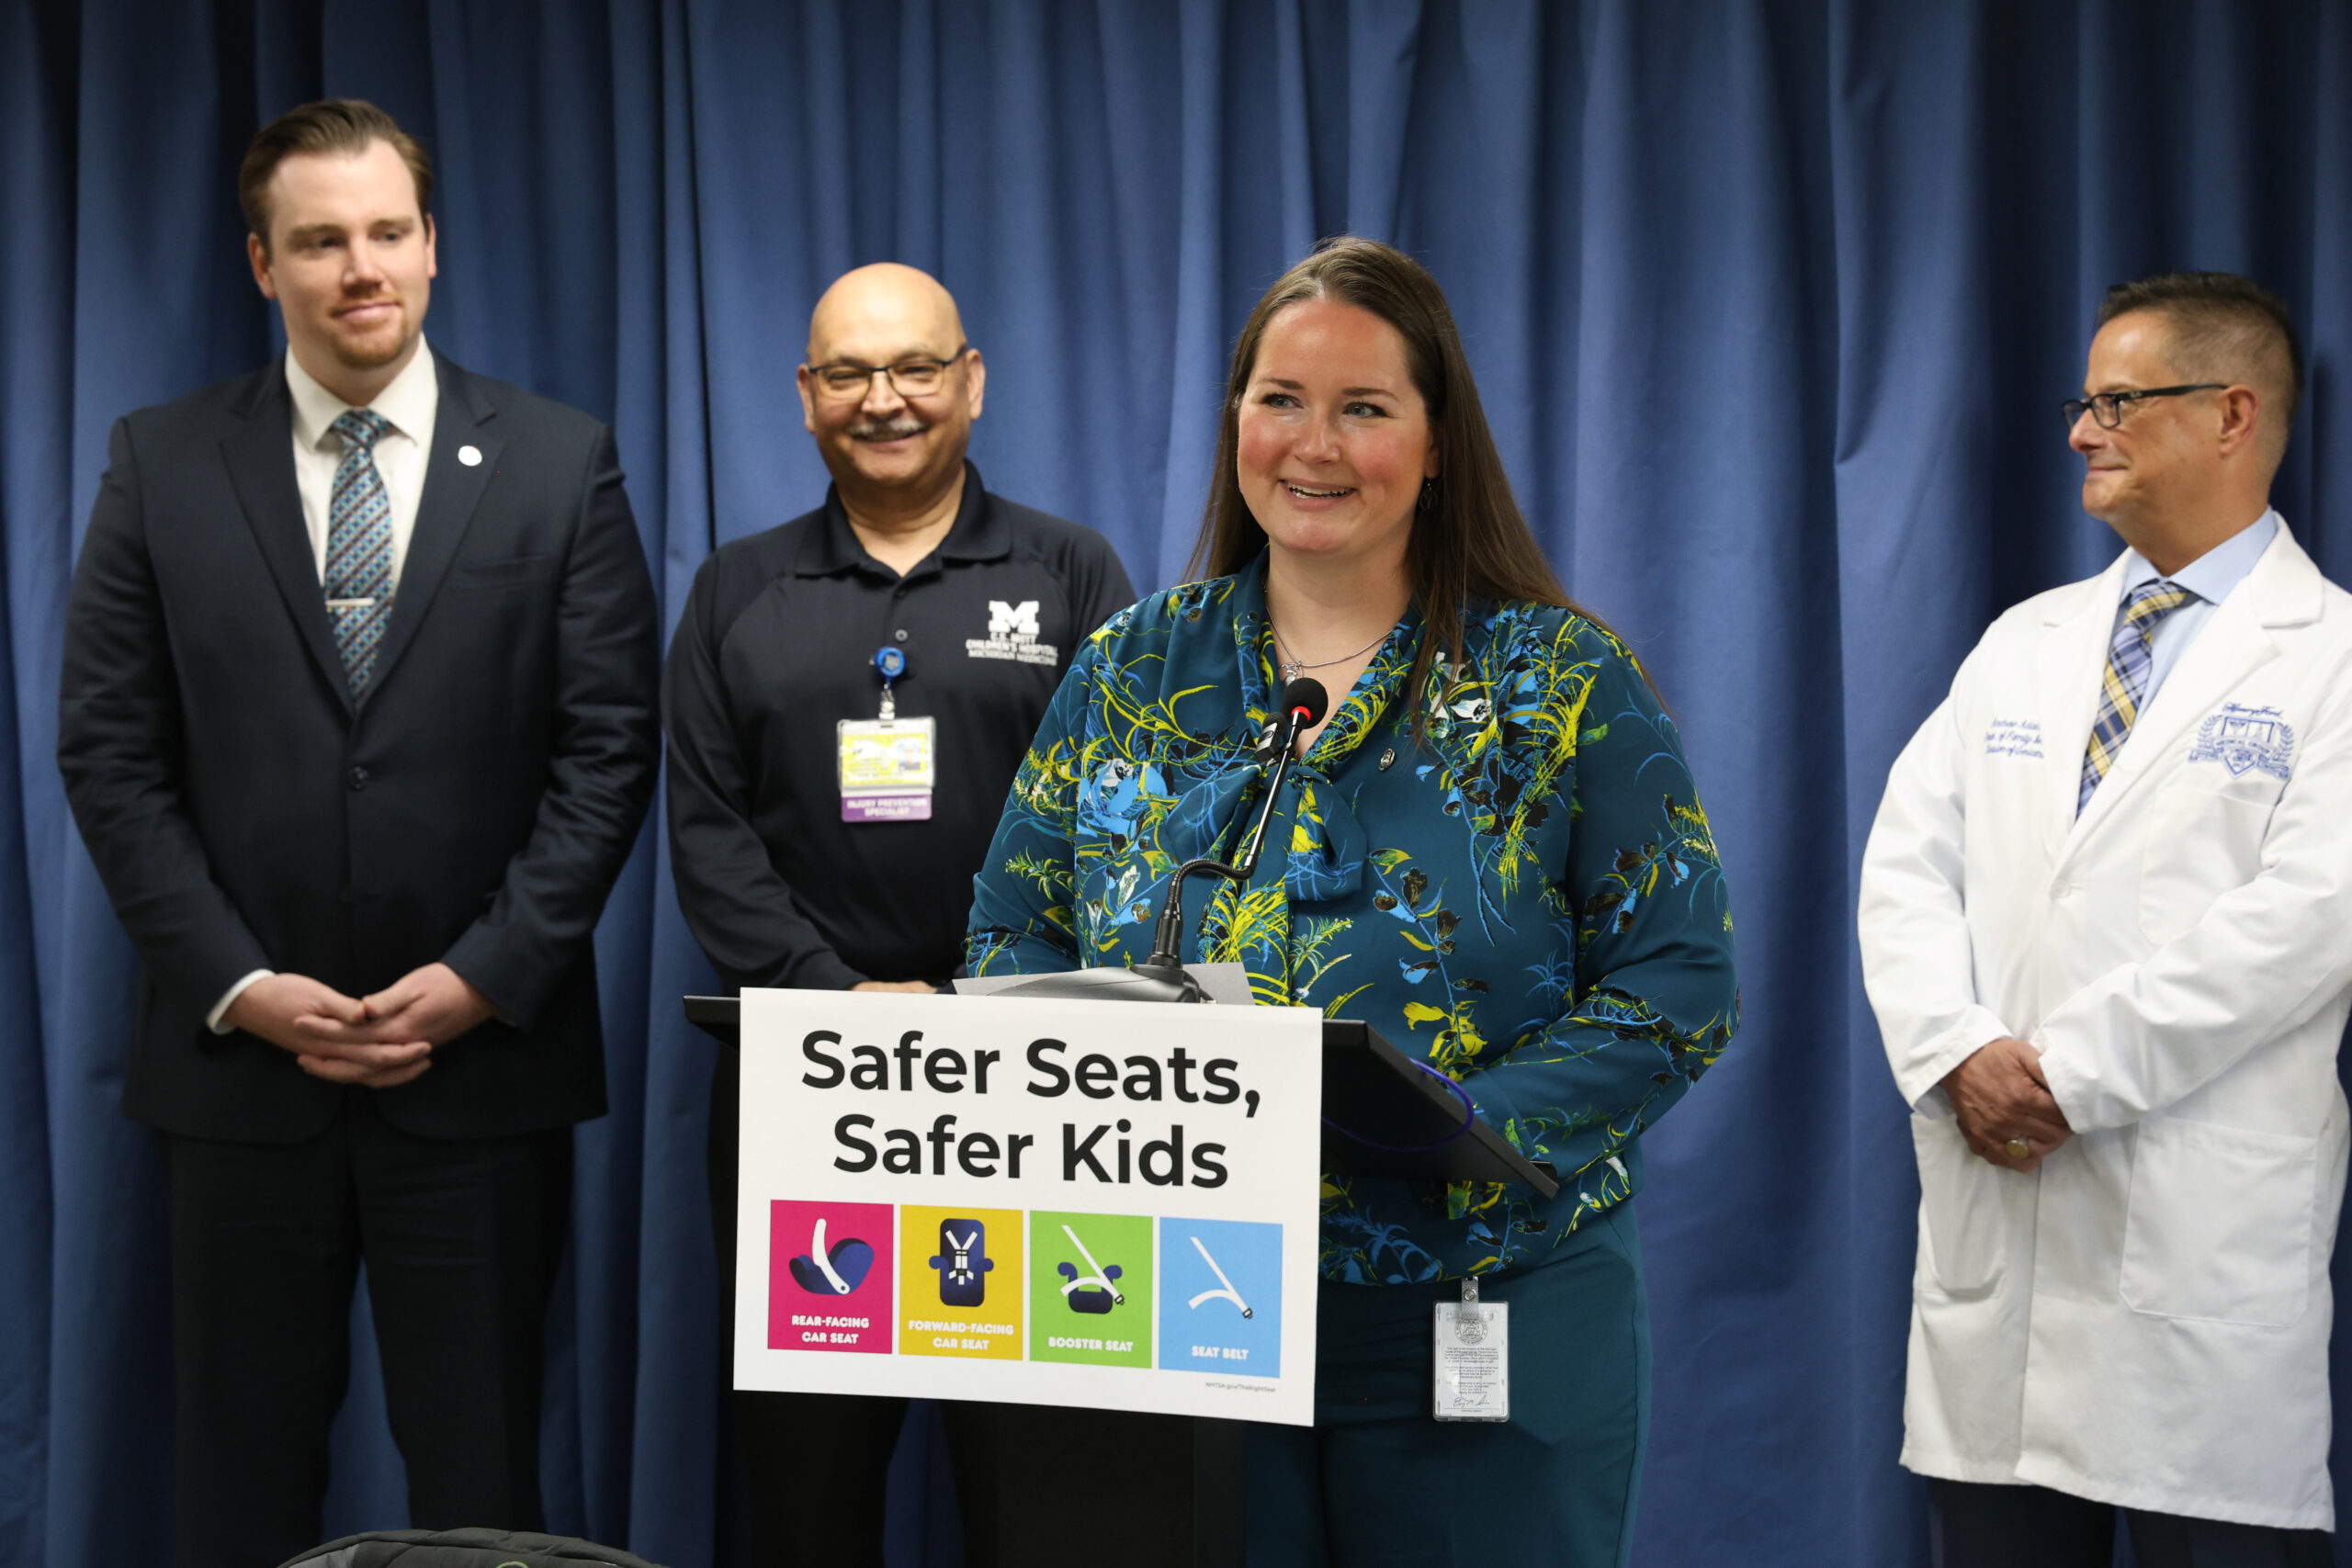 State Rep. Carrie A. Rheingans (D-Ann Arbor) stands at the podium during her and state Rep. John Fitzgerald’s (D-Wyoming) Safer Seats, Safer Kids press conference on May 4, 2023, at the House Office Building in Lansing.